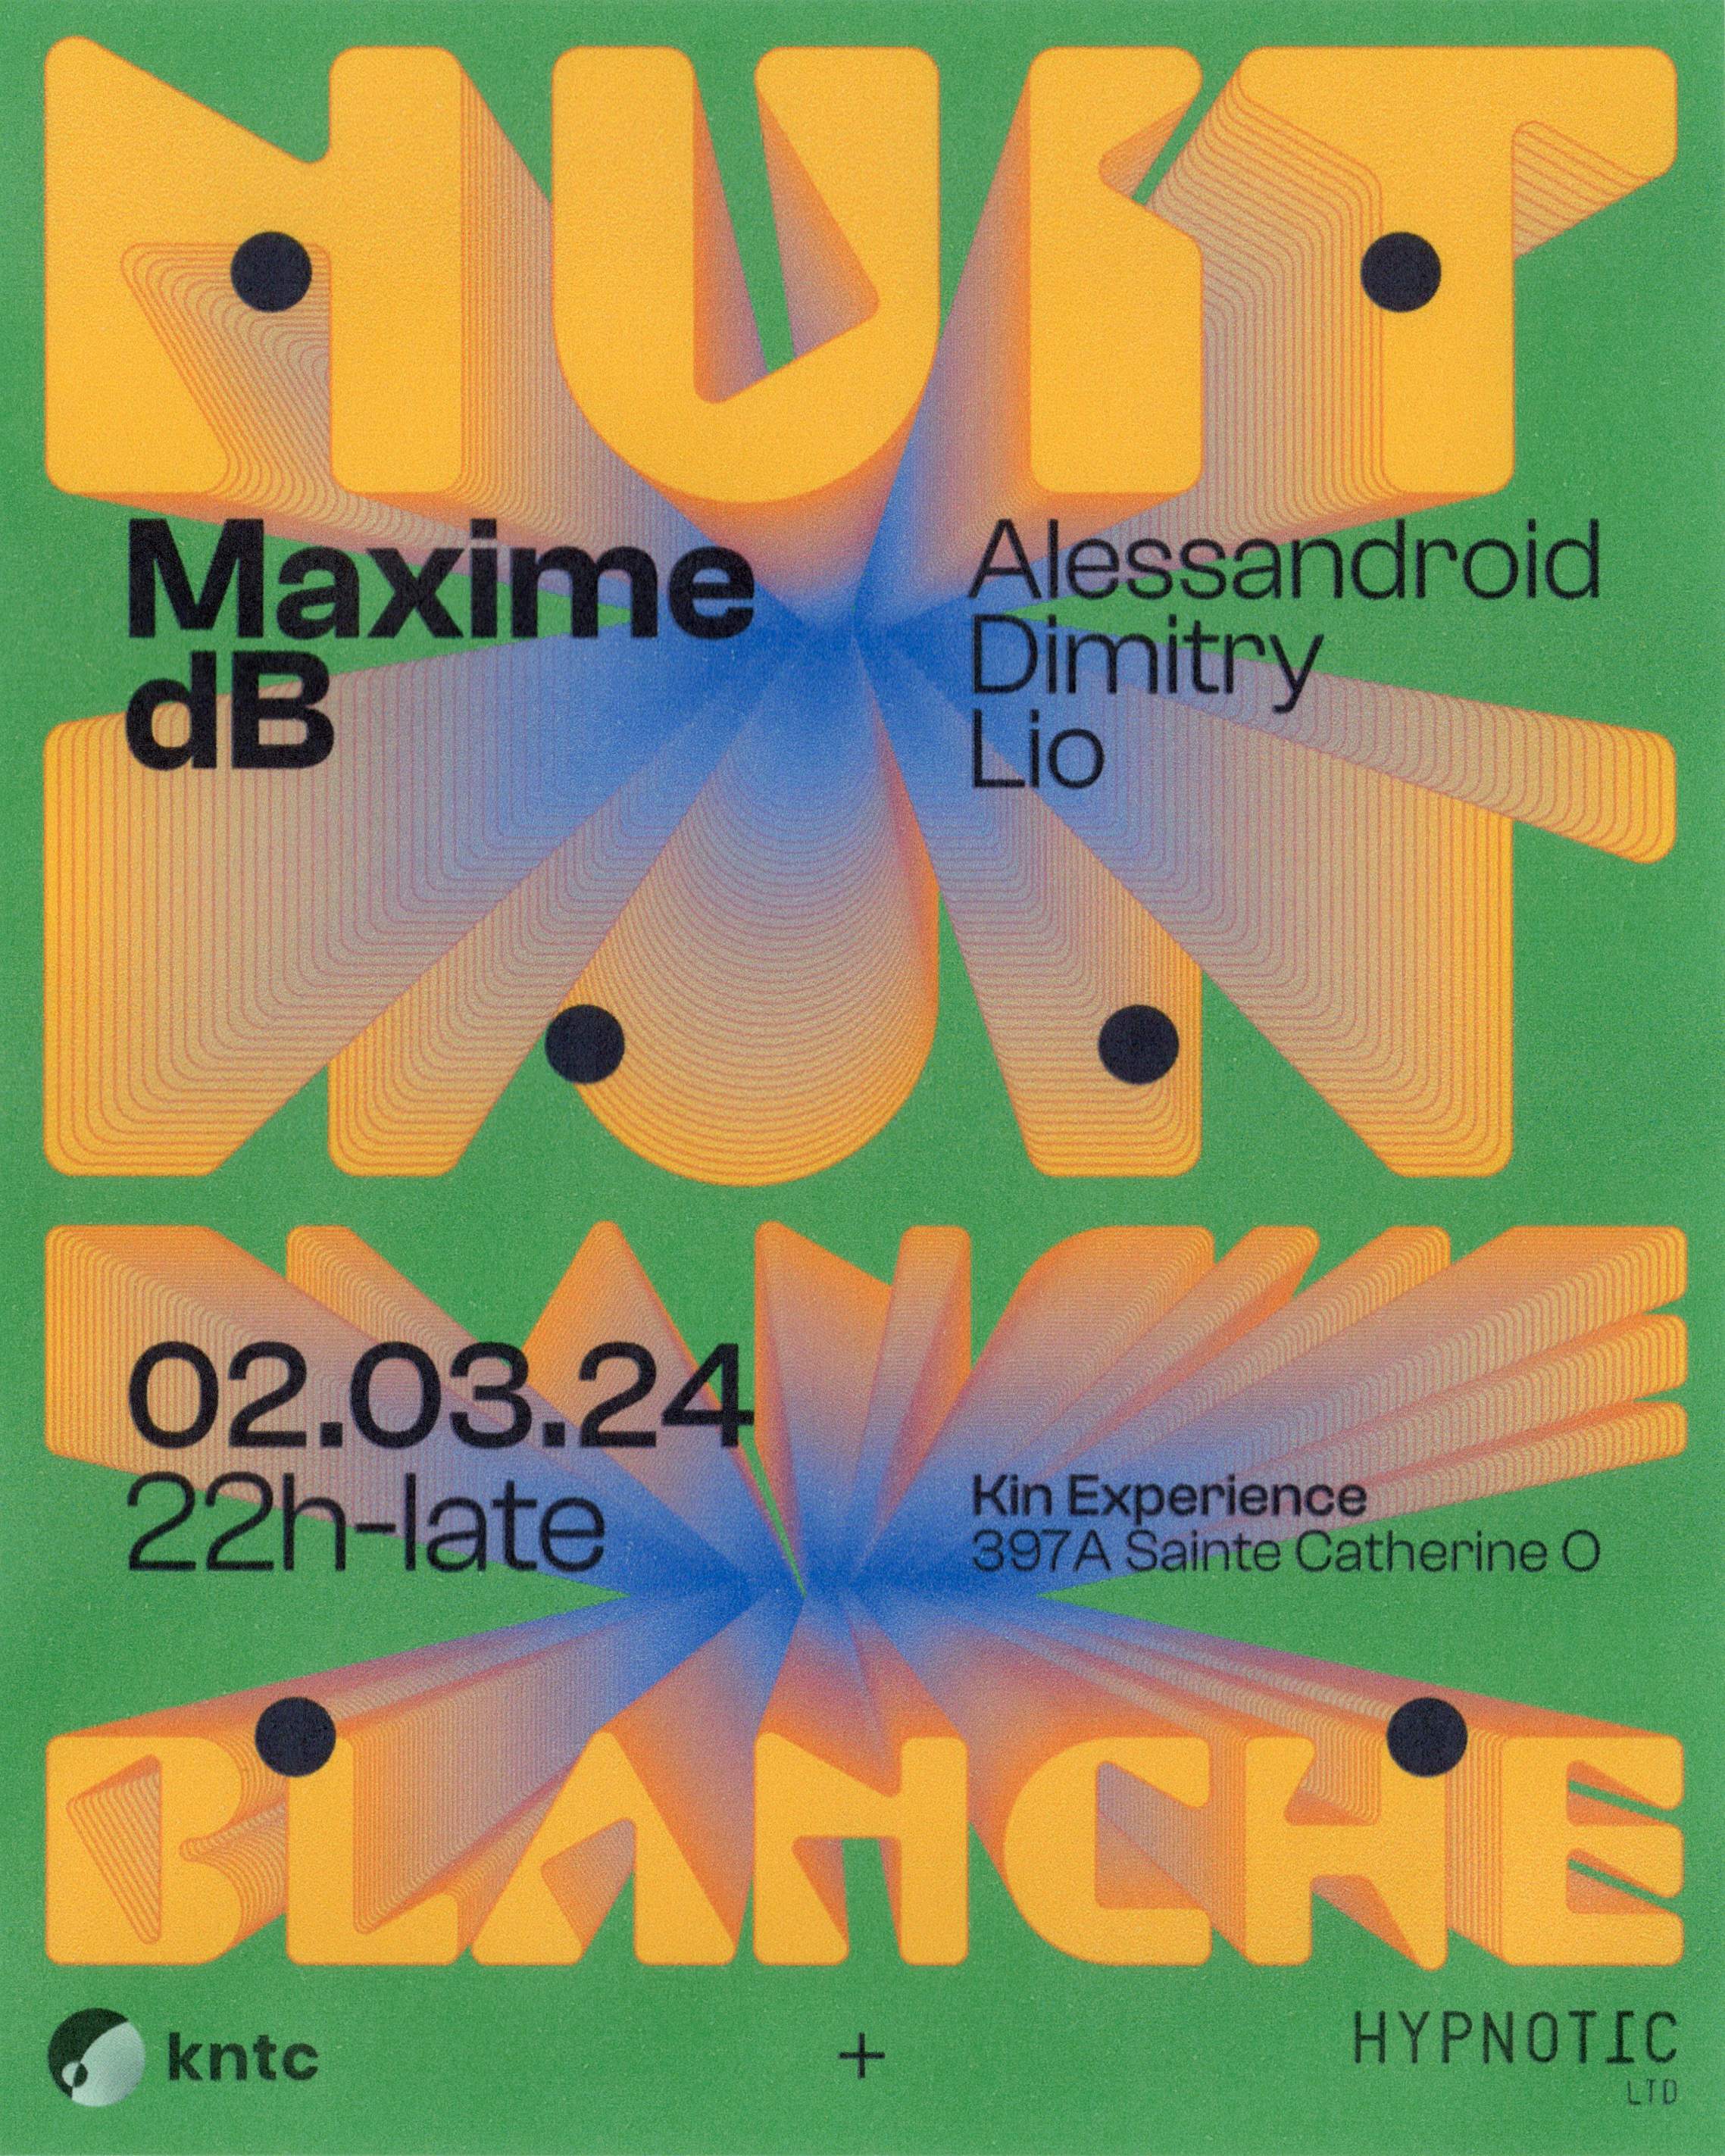 Kinetic x Hypnotic with Maxime dB - Nuit Blanche - フライヤー表